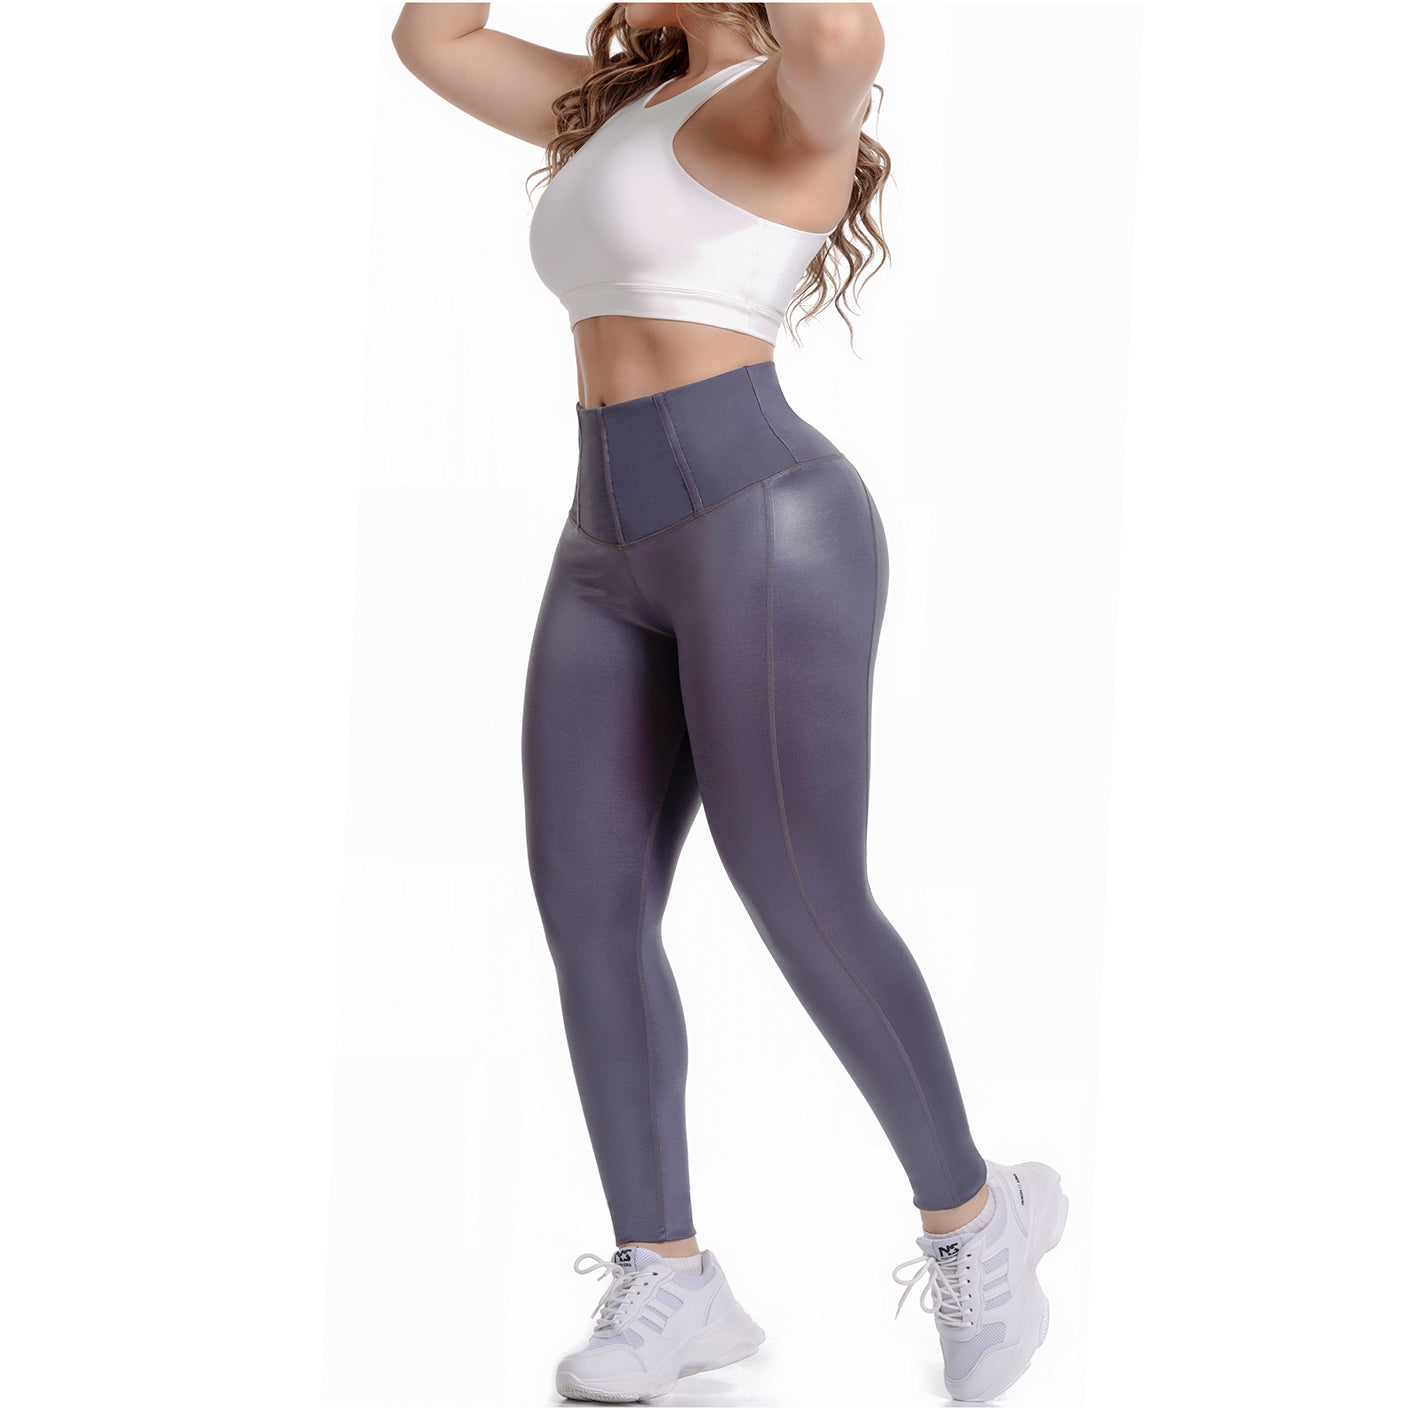 Pre-formed leggings on the buttocks for a lifting effect – Fajas  Colombianas Sale